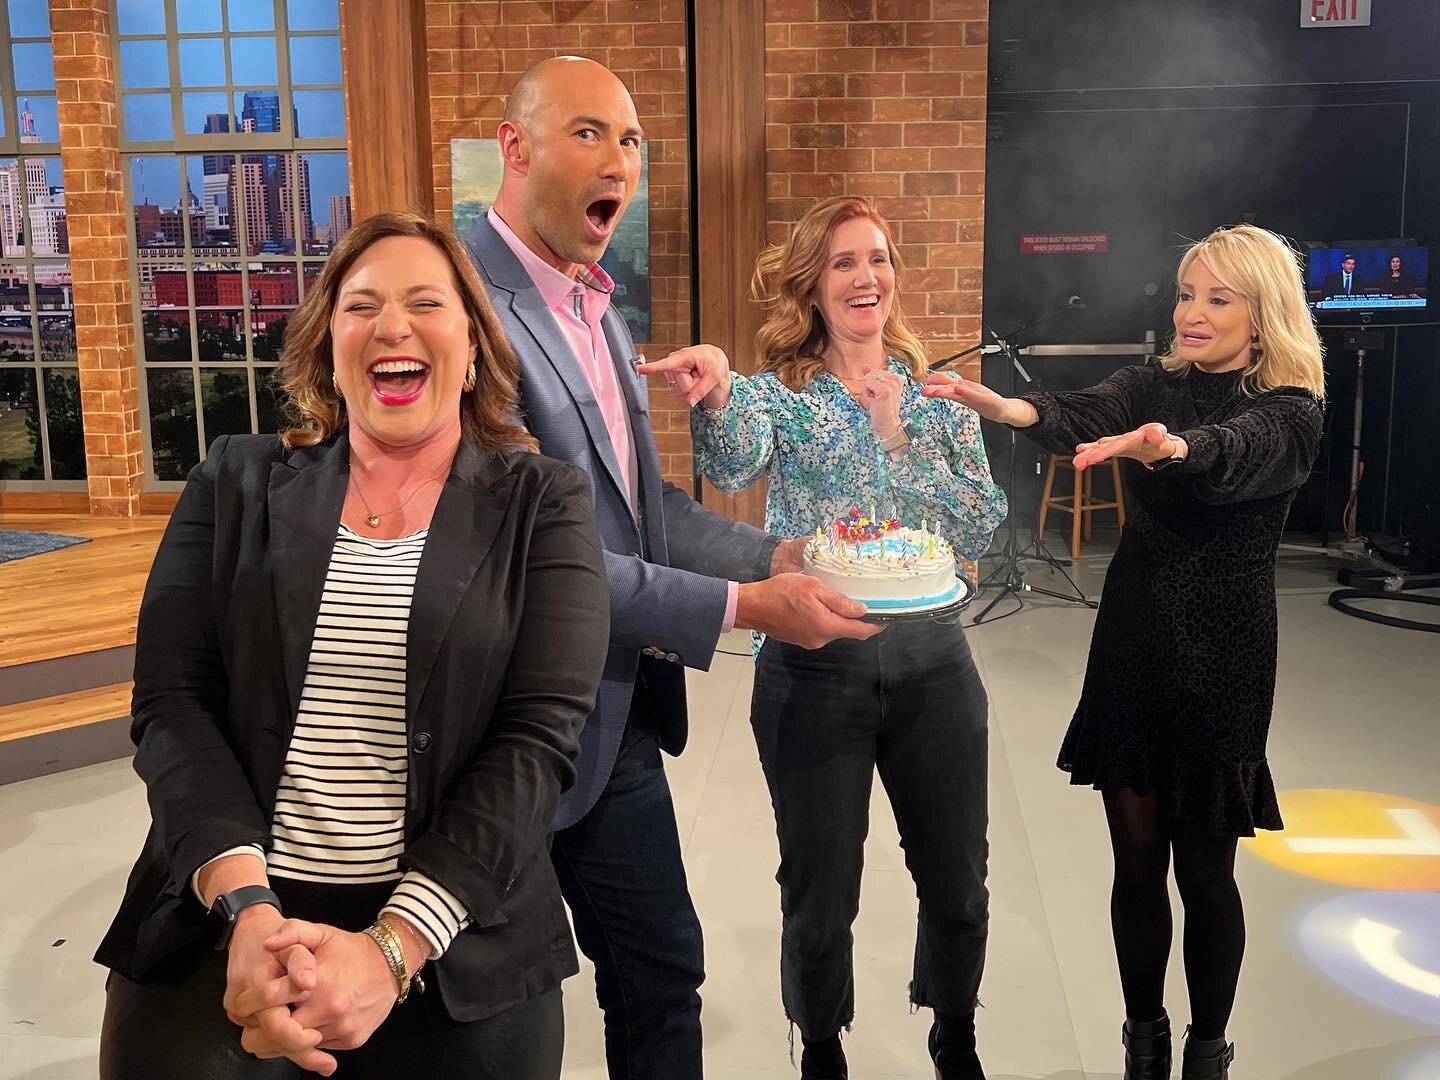 My contribution is just a blip in the 15 years Twin Cities Live celebrated today but it&rsquo;s been an incredible 10 months with this talented team. 
I&rsquo;m so thankful for everyone&rsquo;s creativity, hard work and passion. Congrats @twincitiesl